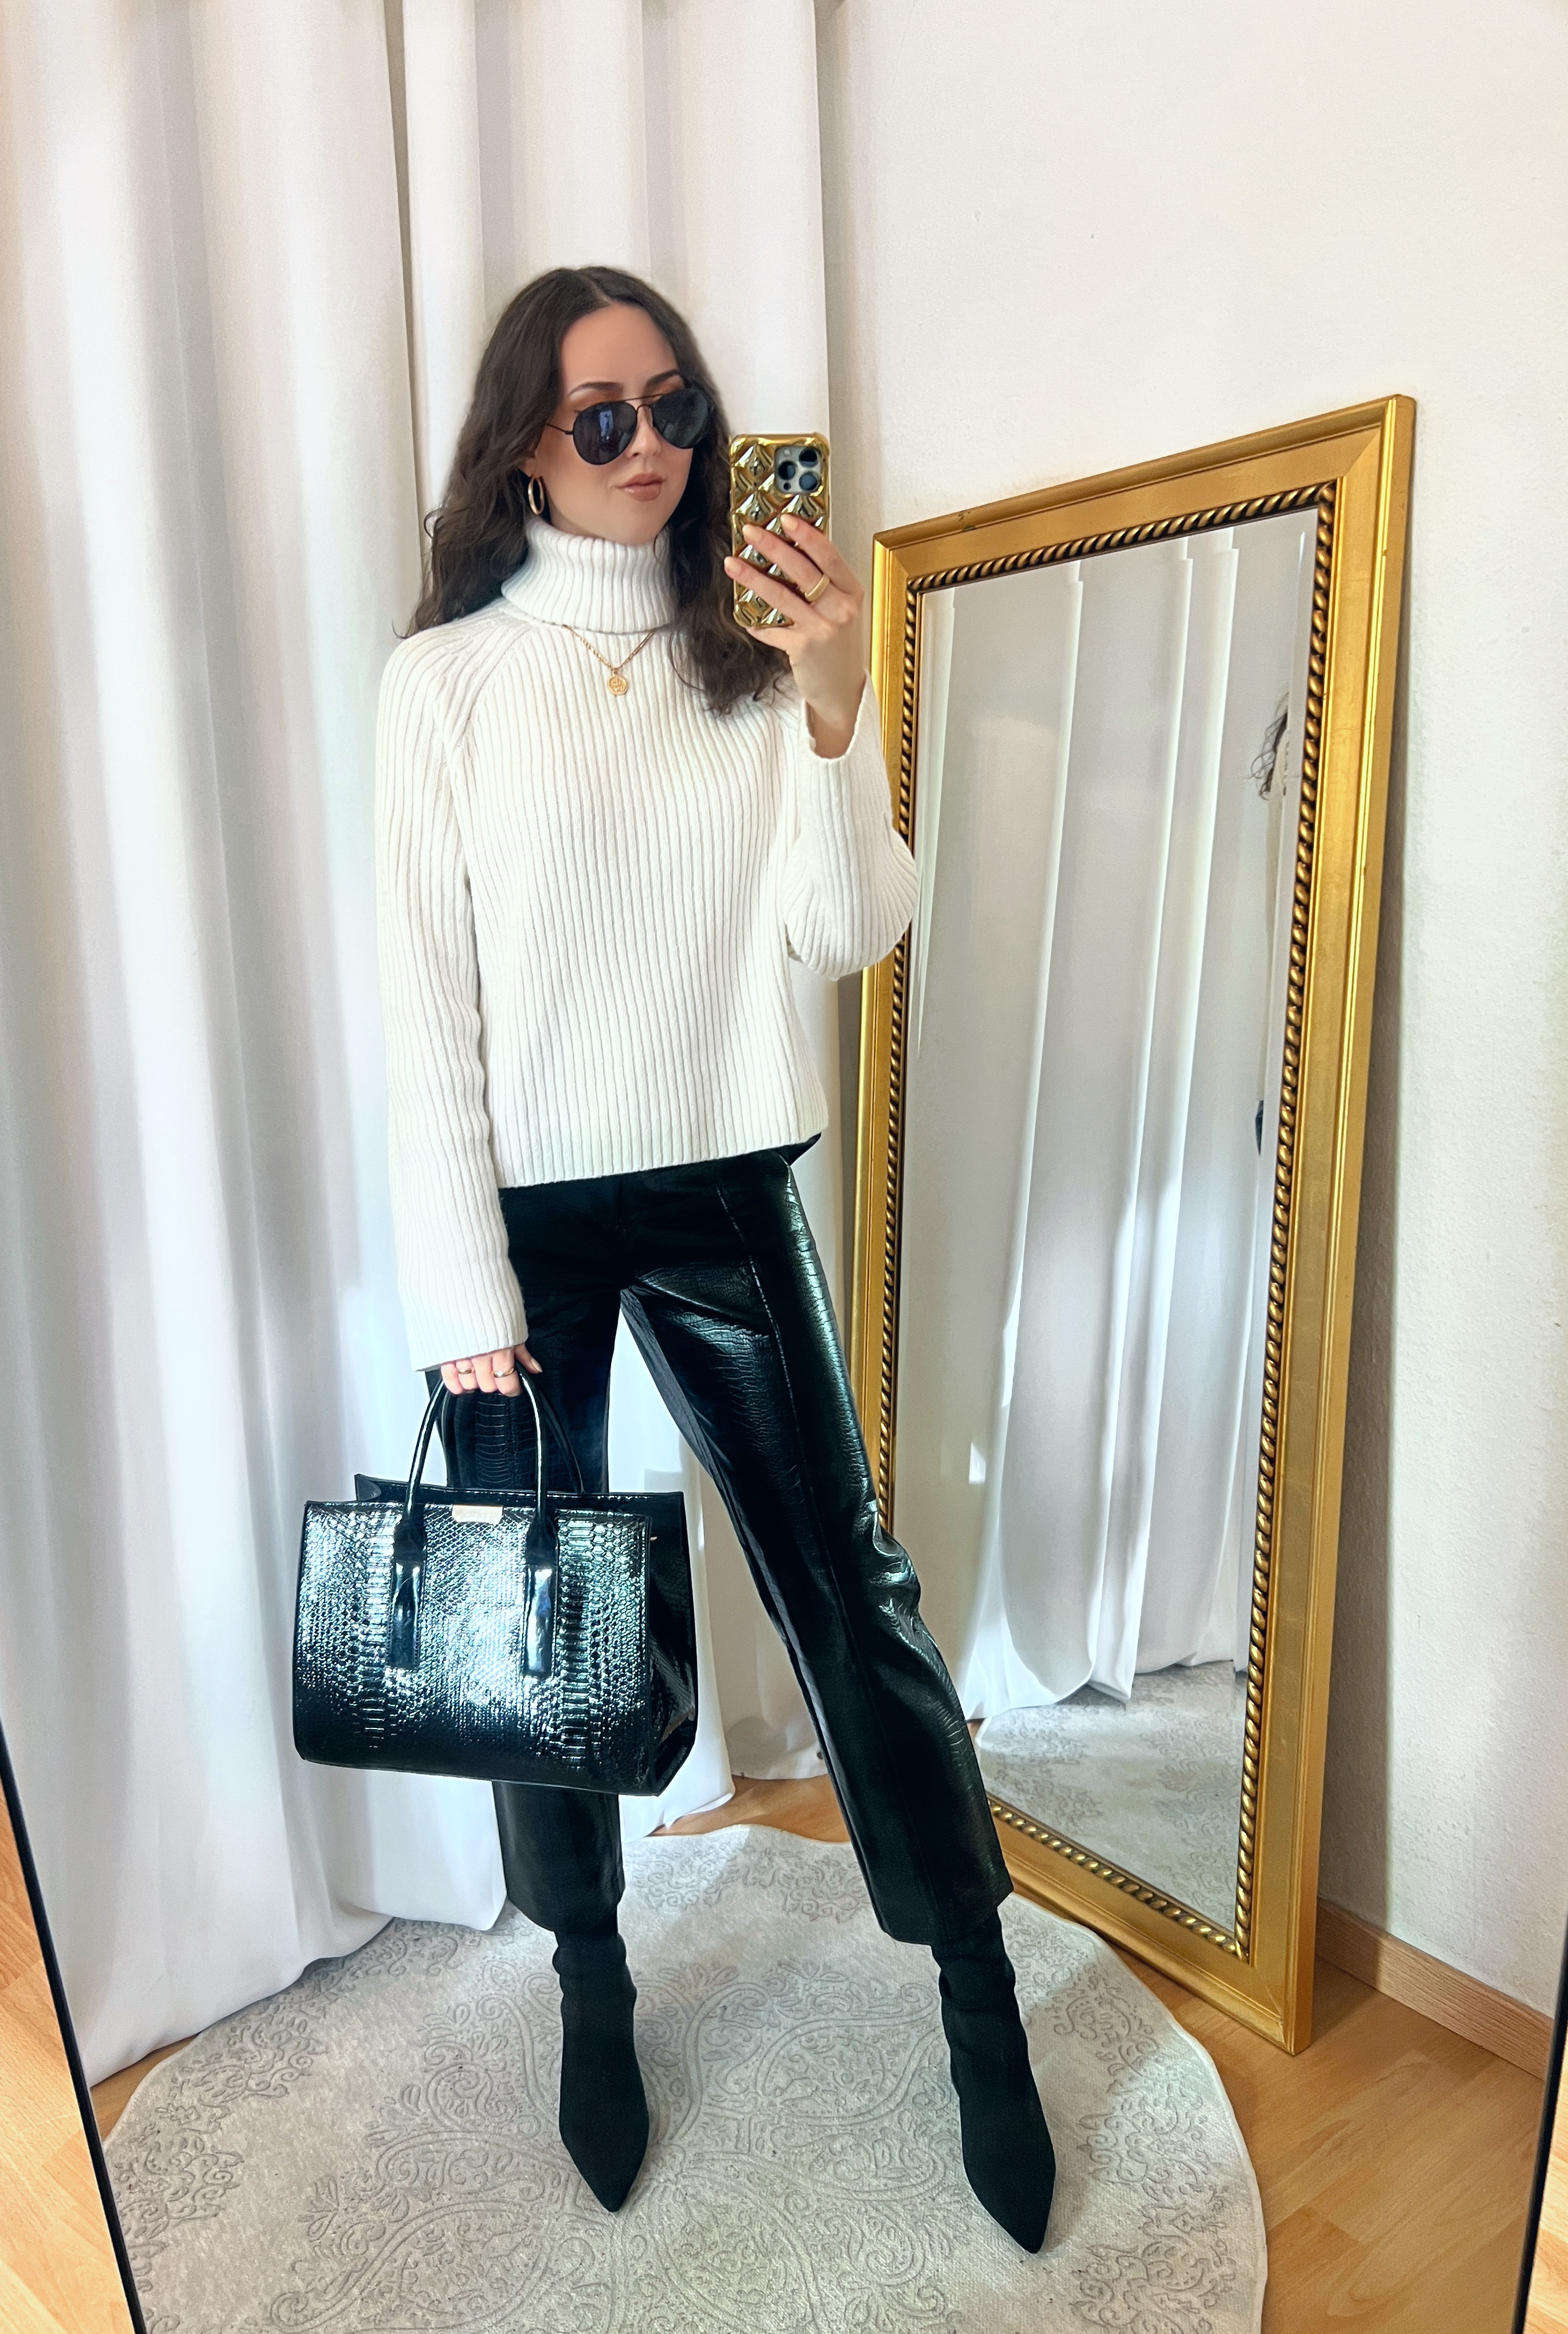 White Turtleneck Sweater and Black Crocodile Leather Pants Outfit